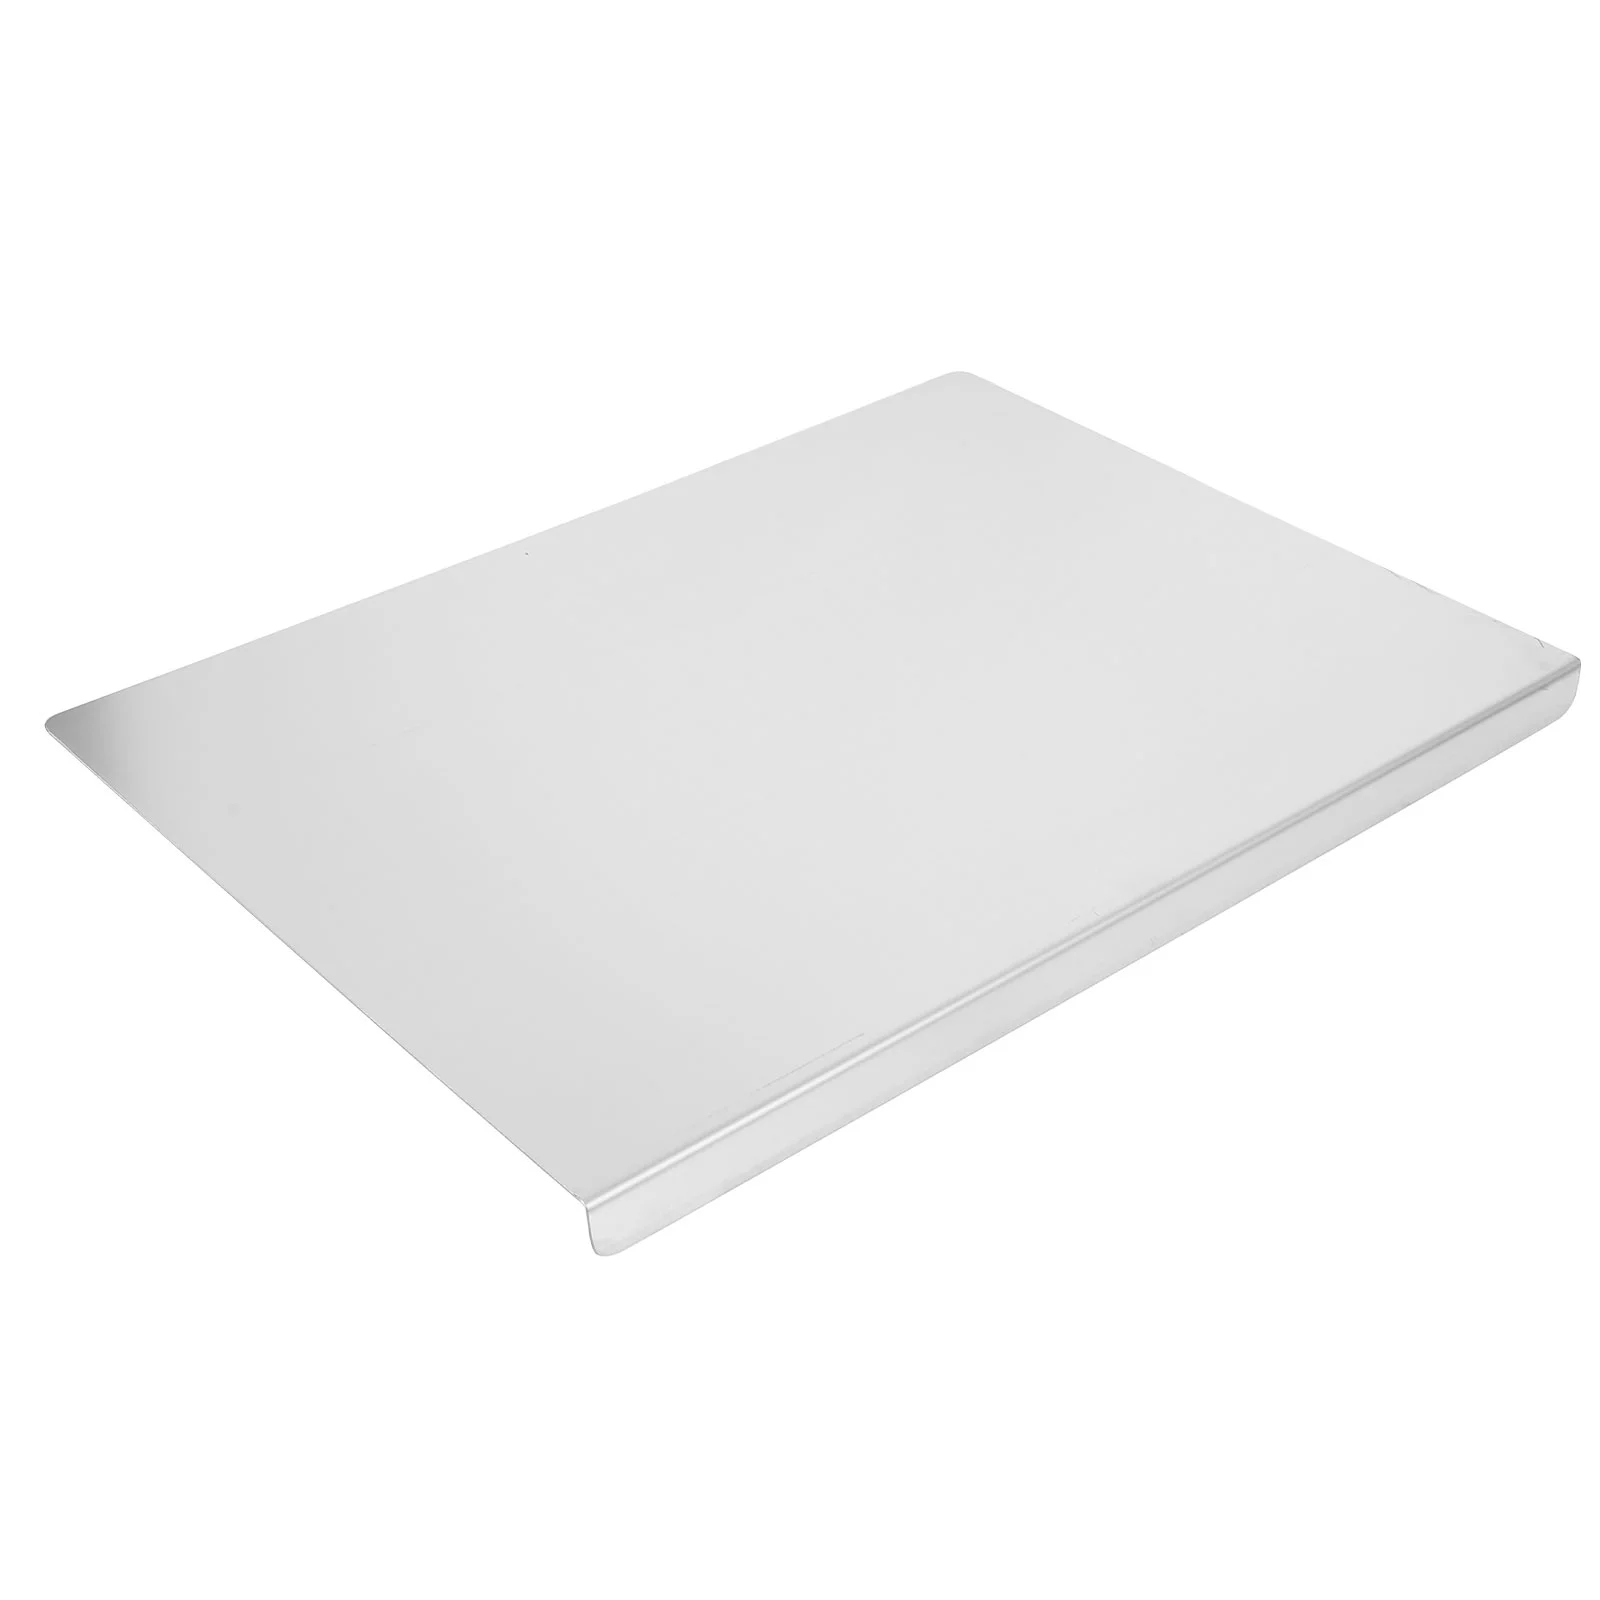 

Stainless Steel Board Cutting Boards Chopping Board Rolling Dough For Kitchen Pastry Board Mat ( Sliver )